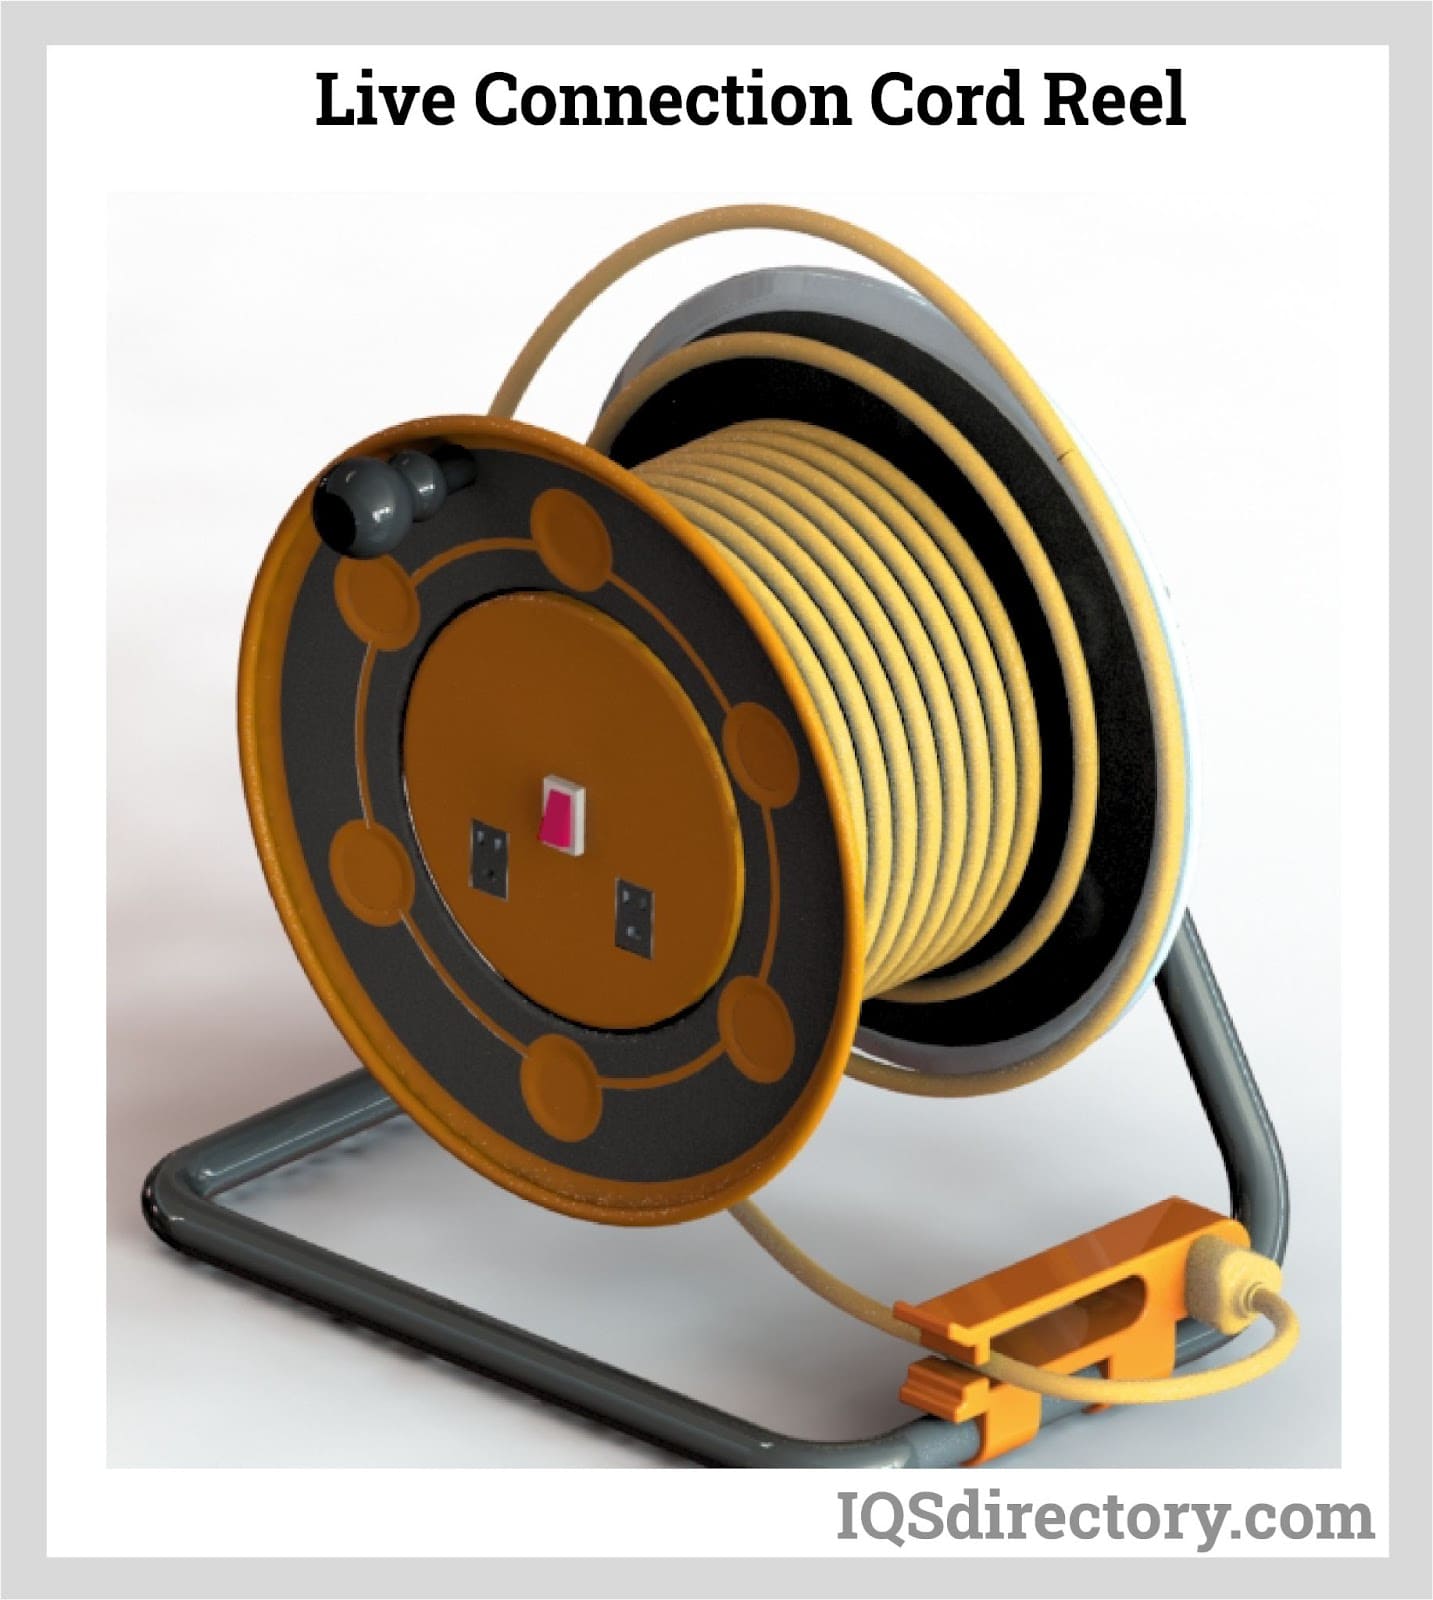 Live Connection Cord Reel